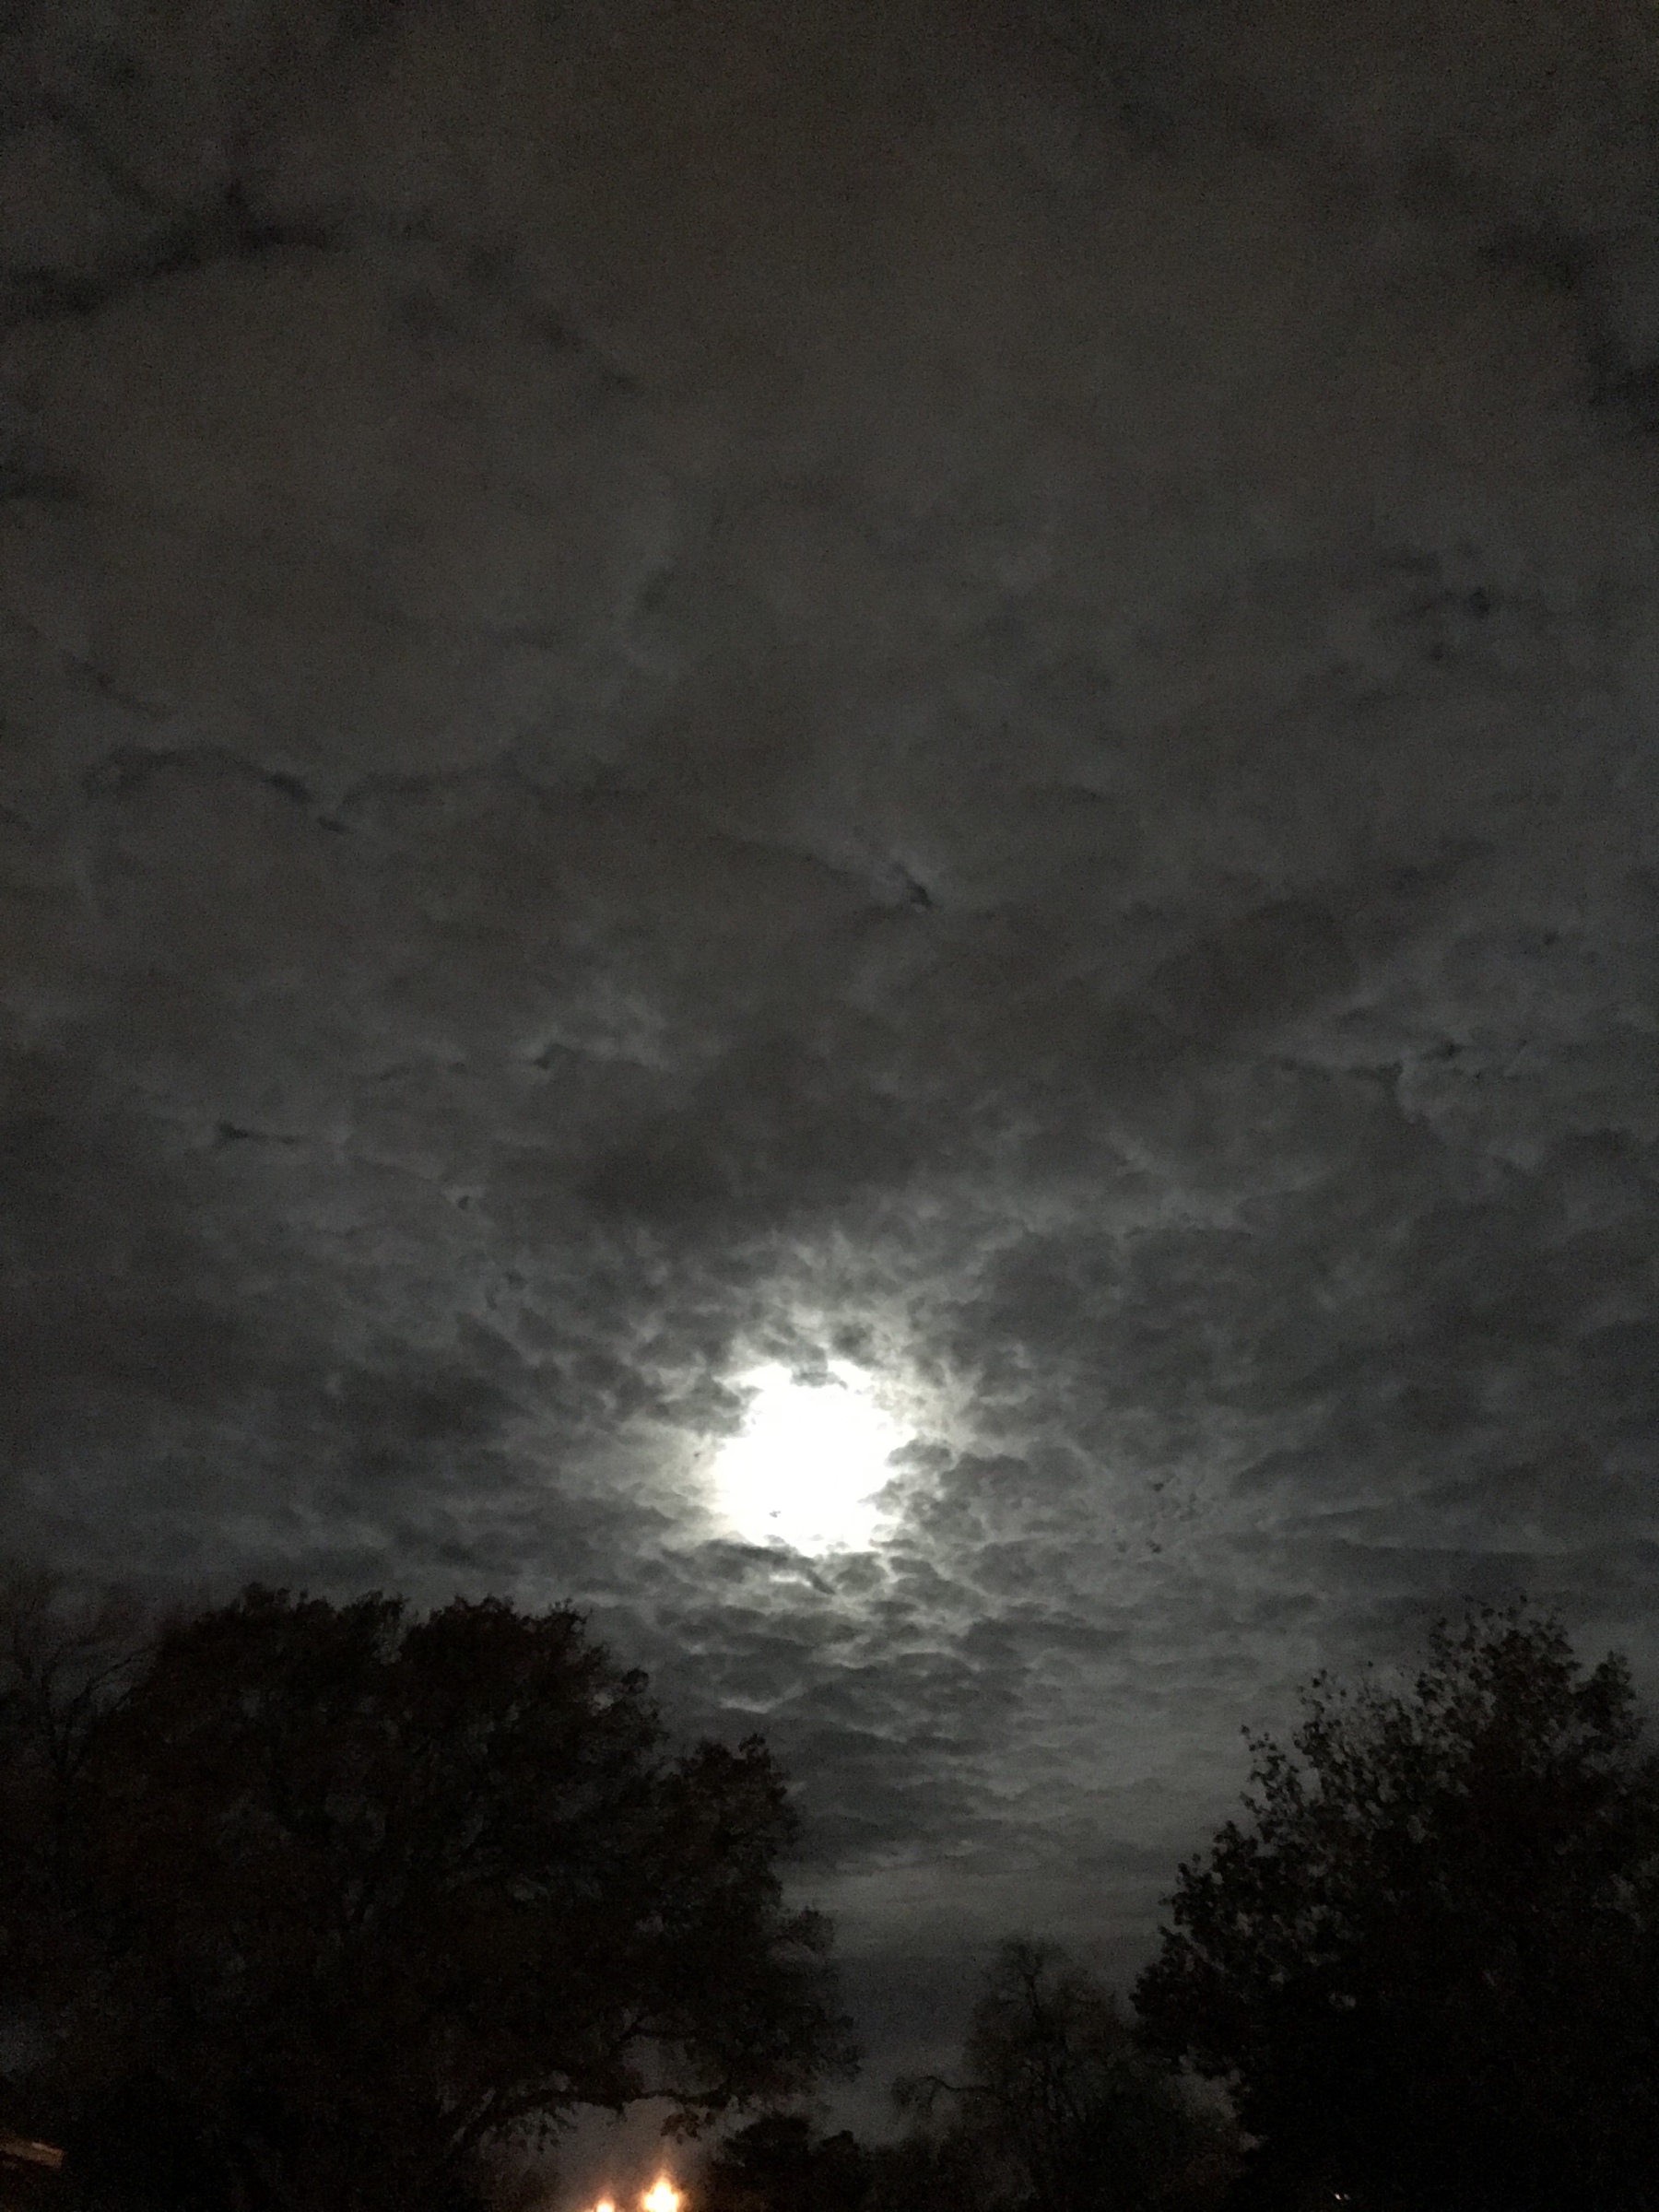 Setting moon shining through patchy clouds